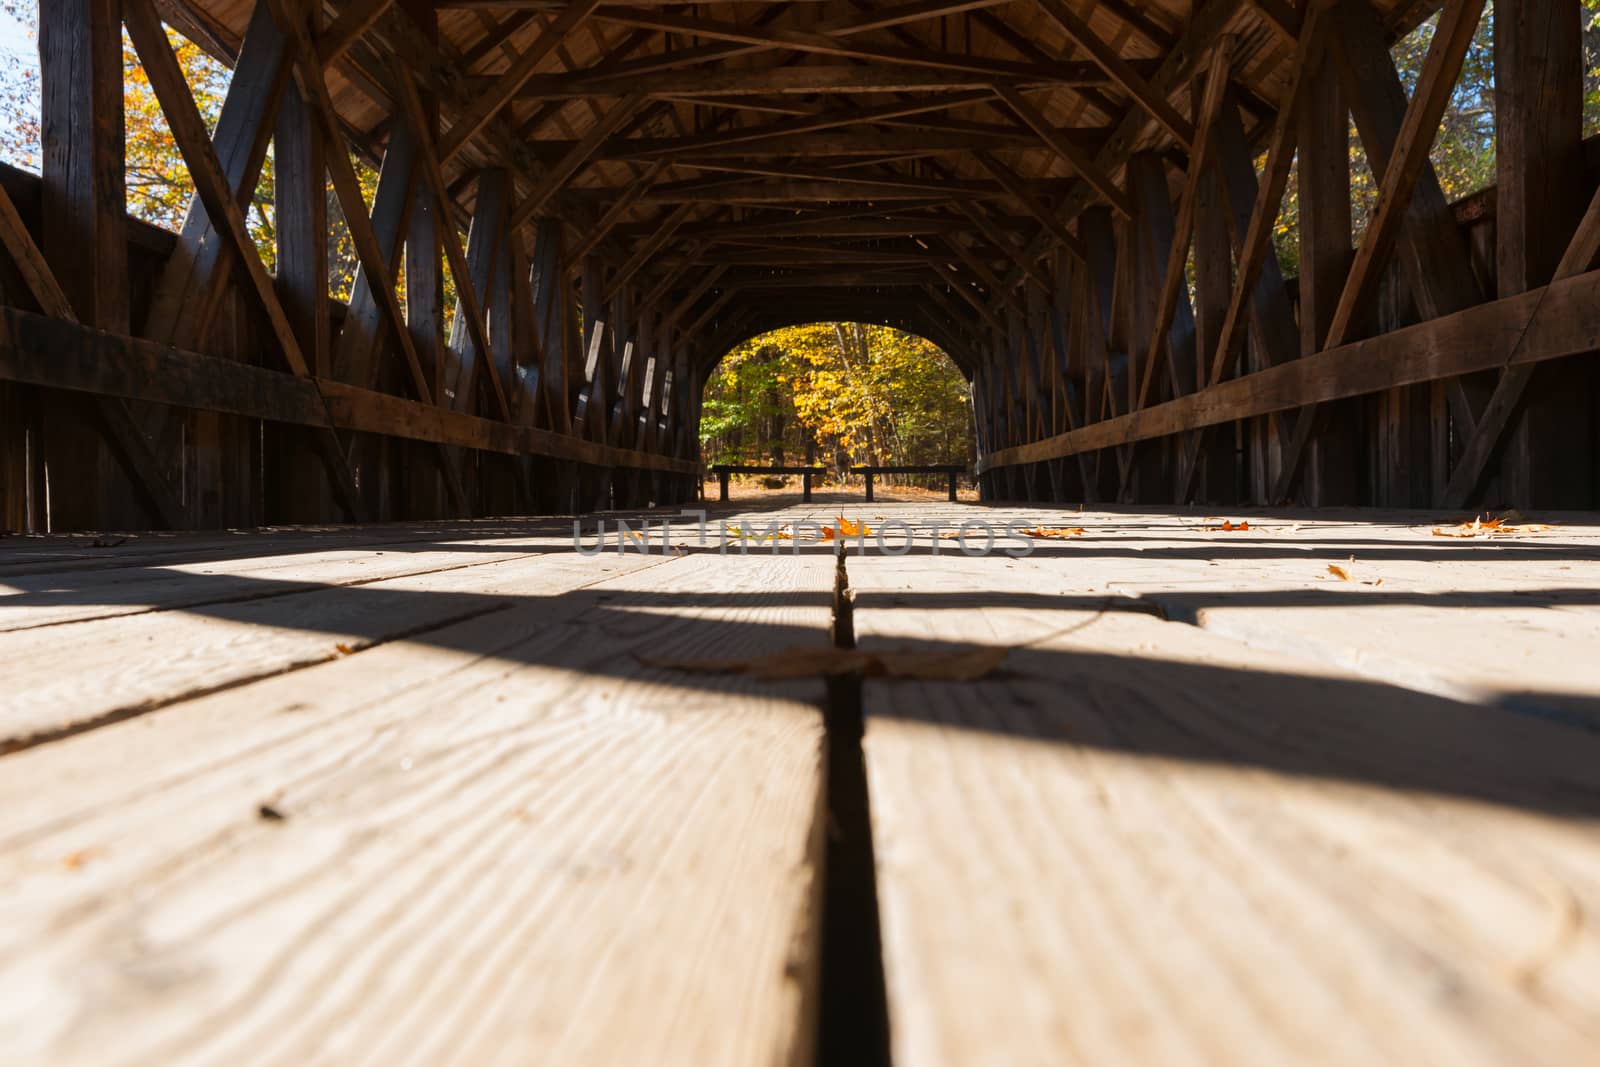 View along platform of Sunday River covered bridge with structural by brians101